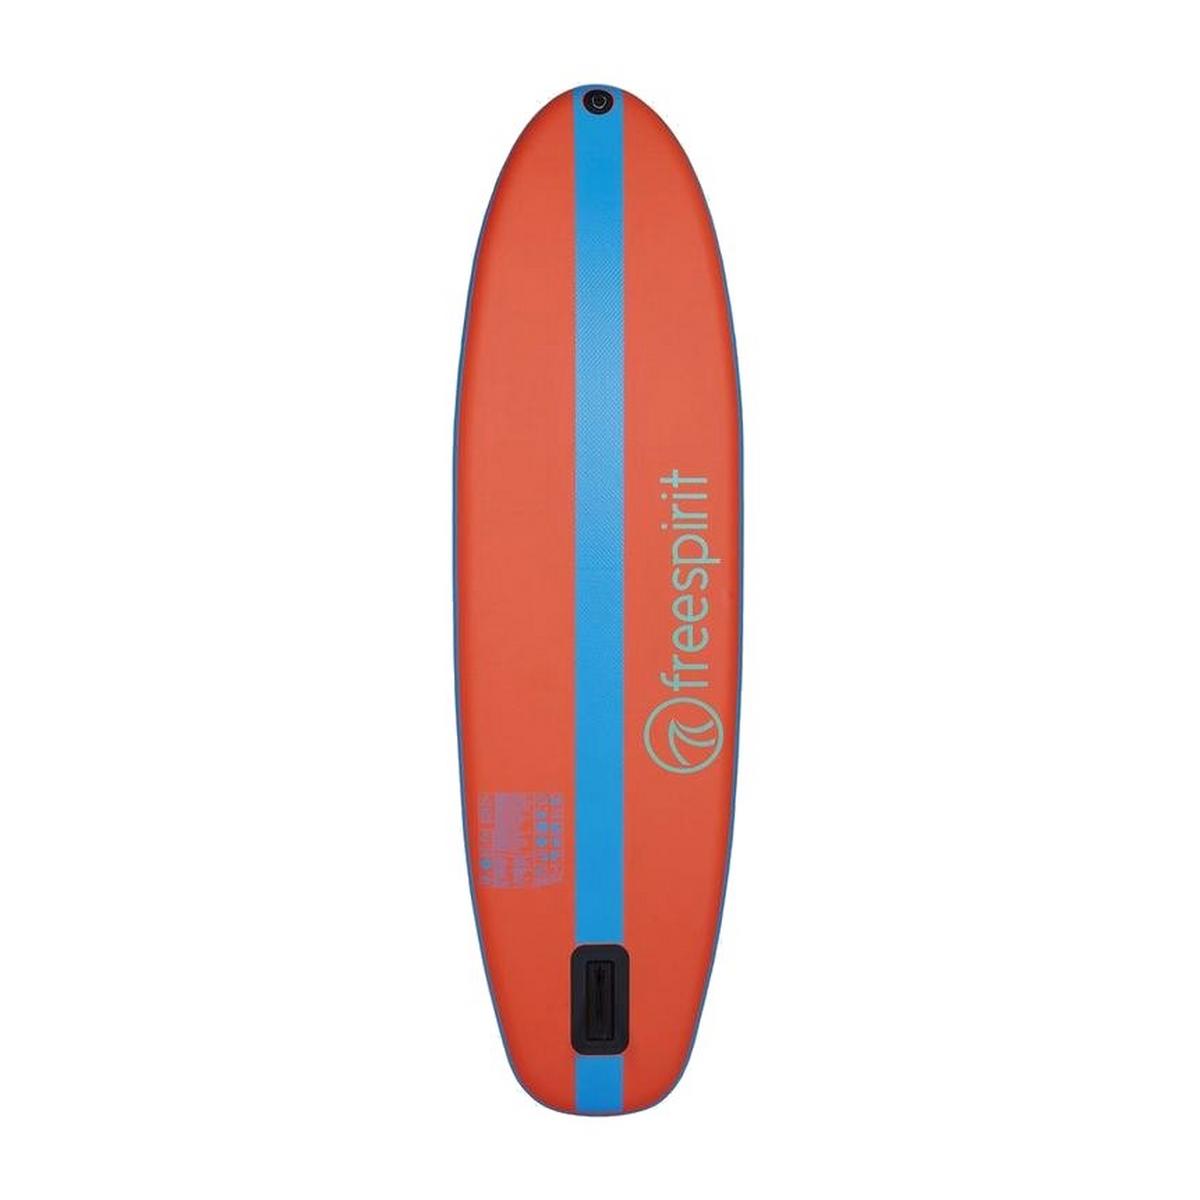 Freespirit Dagon 9ft Inflatable Stand-up Paddle Board Package